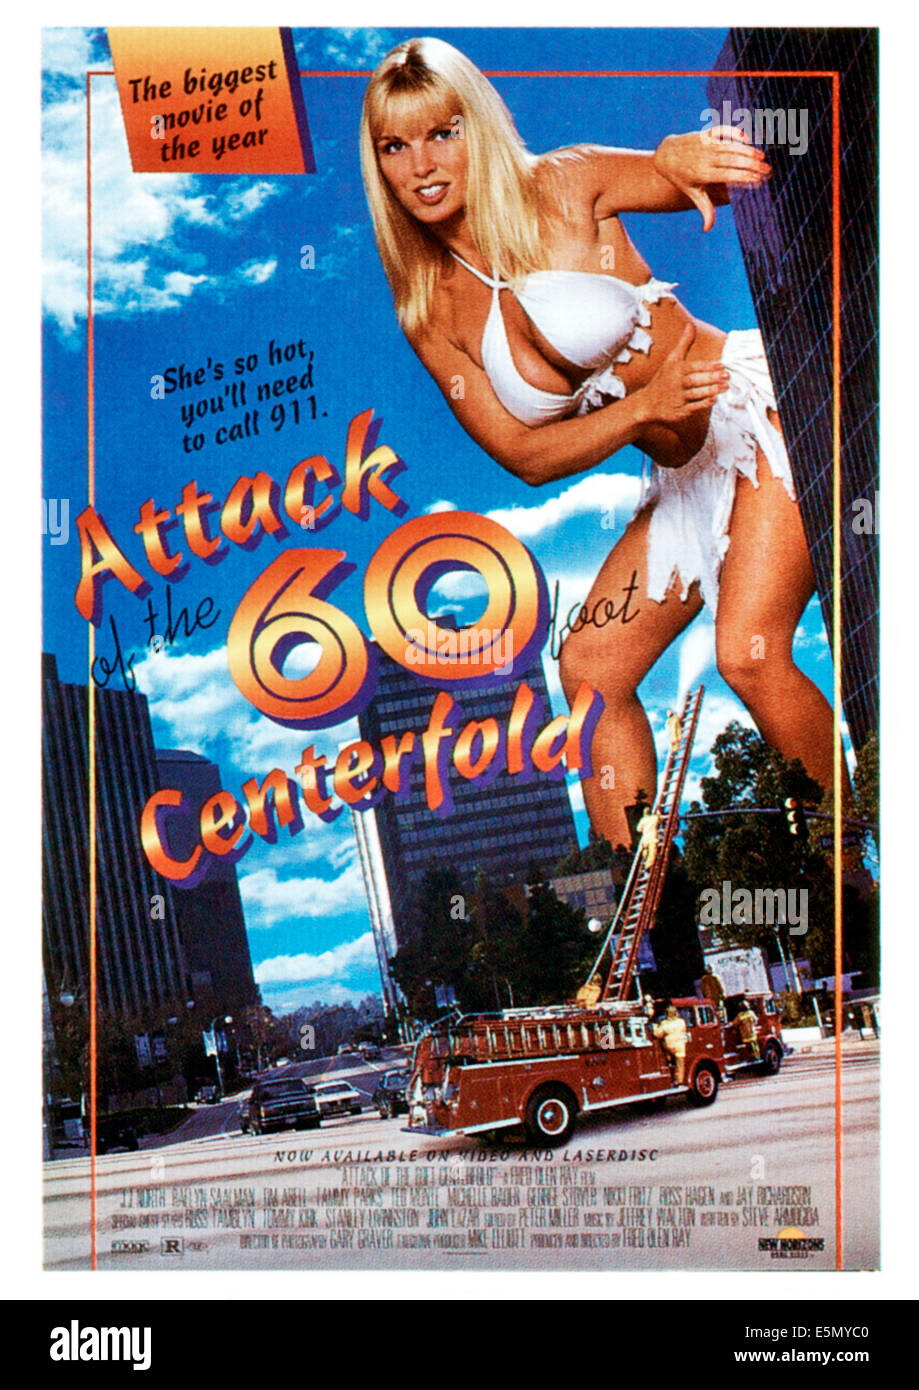 Attack Of The 60 Foot Centerfold [1995]